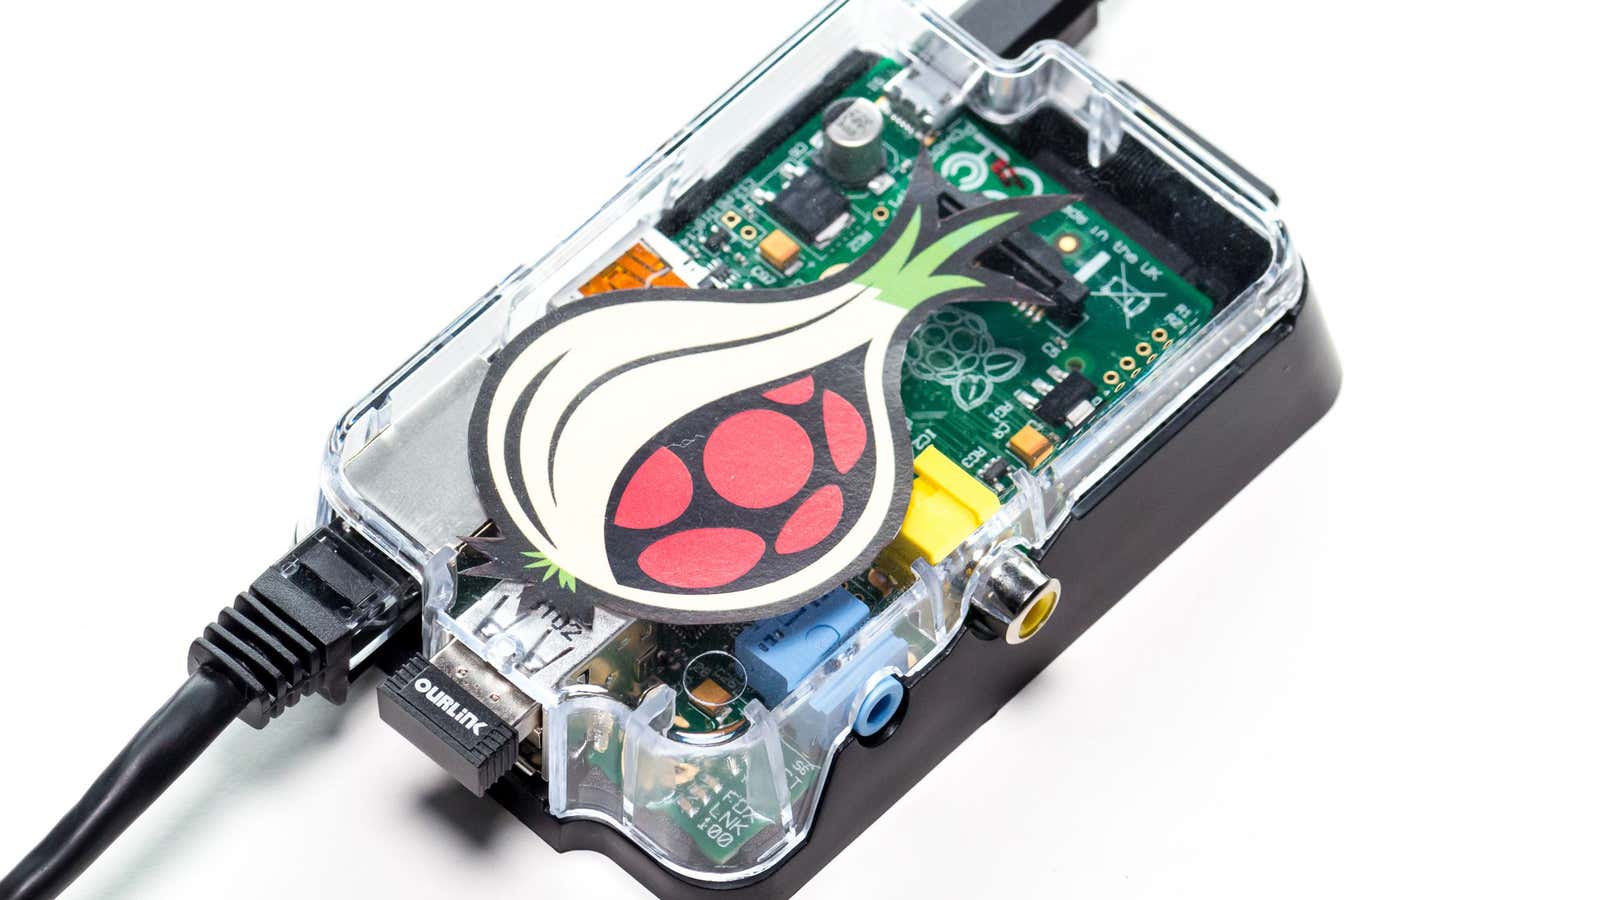 The Onion Pi pack, made by Adafruit, is one of many in the growing privacy hardware industry.